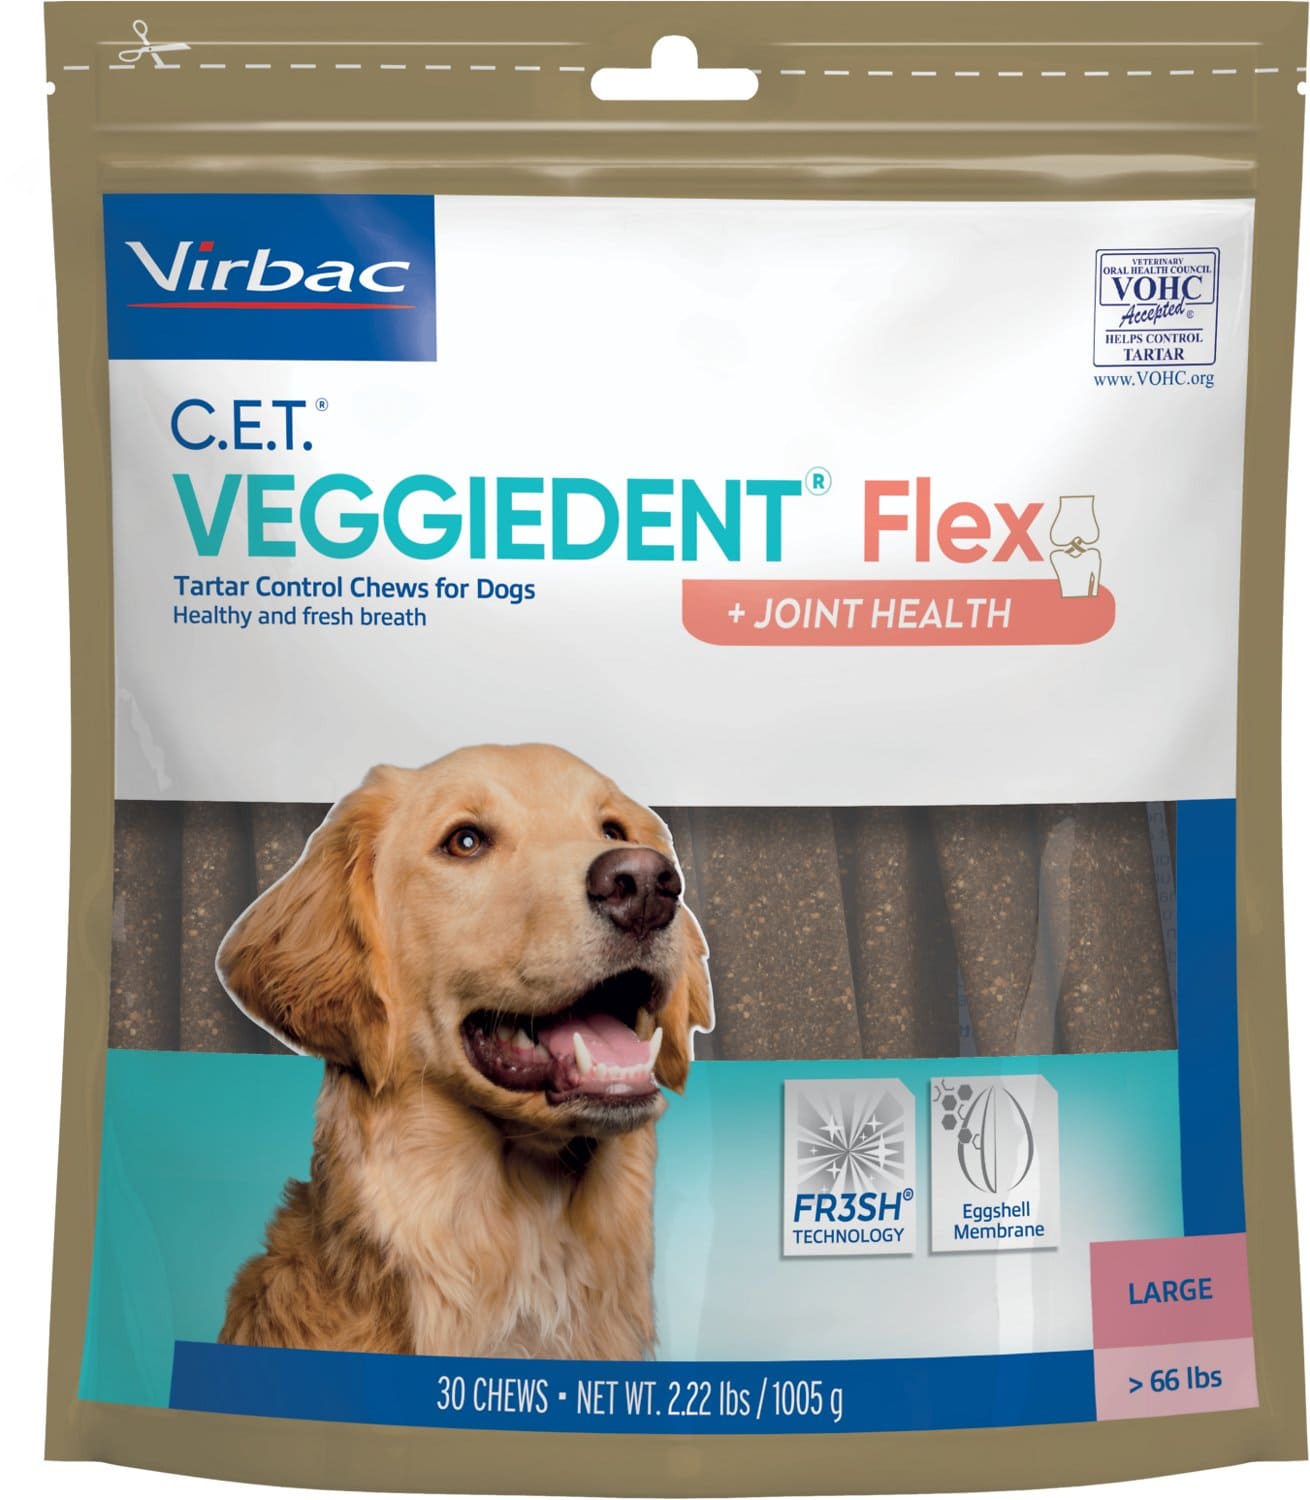 C.E.T. VeggieDent Flex + Joint Health 30 chews for large dogs over 66 lbs 1